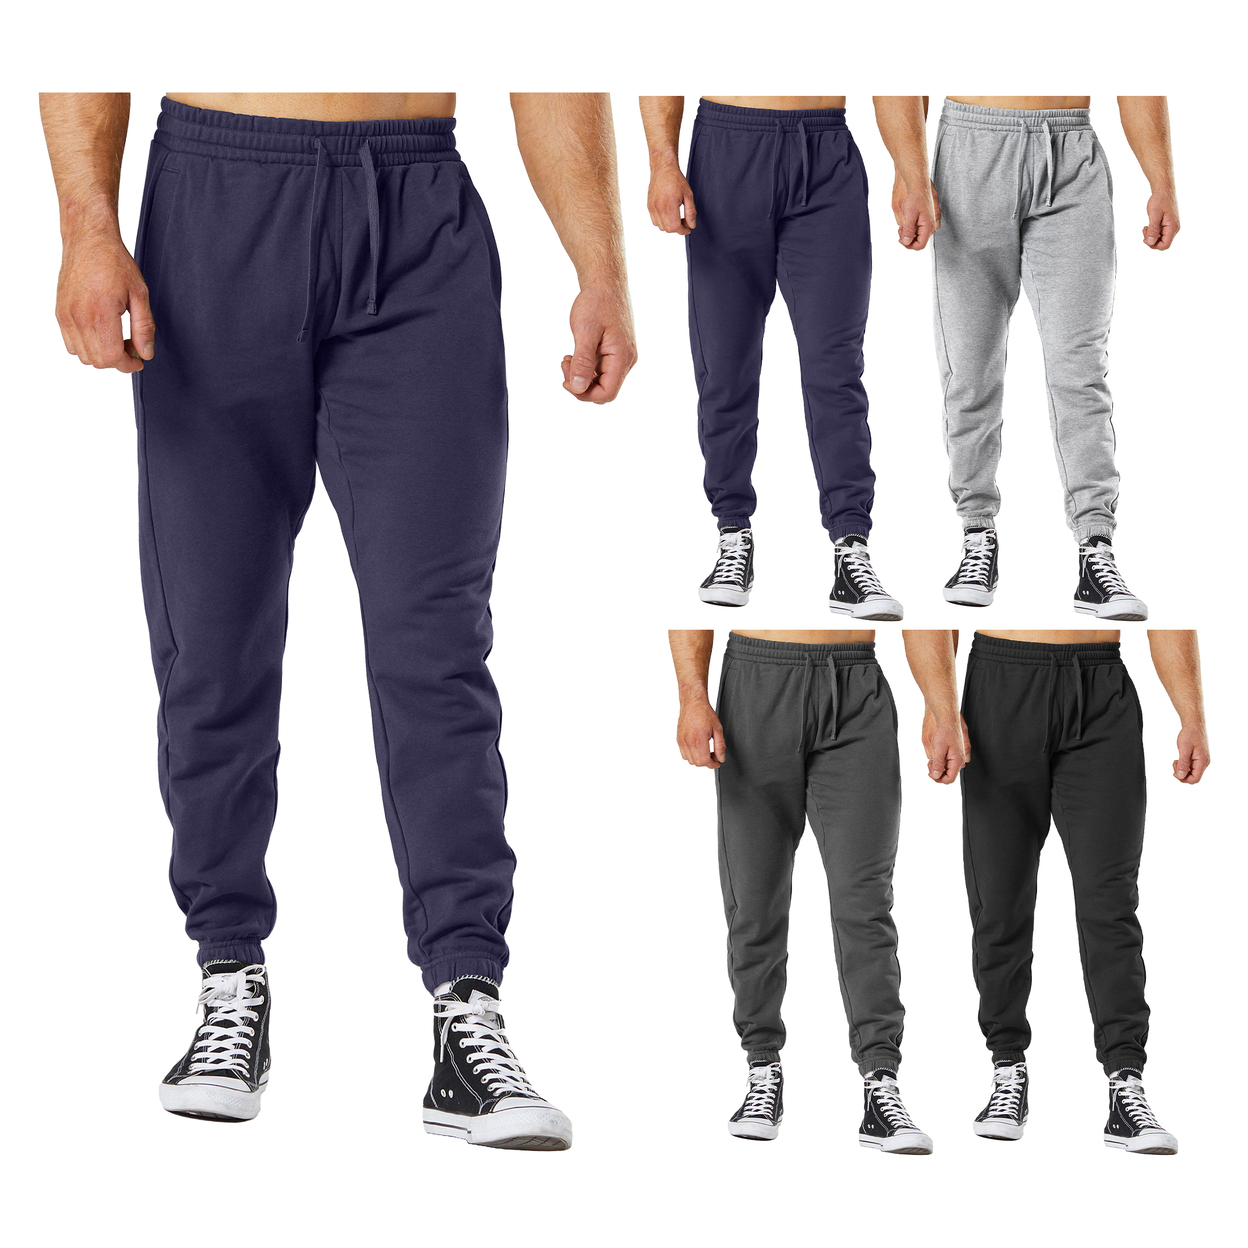 Multi-Pack: Men's Ultra-Soft Cozy Winter Warm Casual Fleece-Lined Sweatpants Jogger - 1-pack, Small